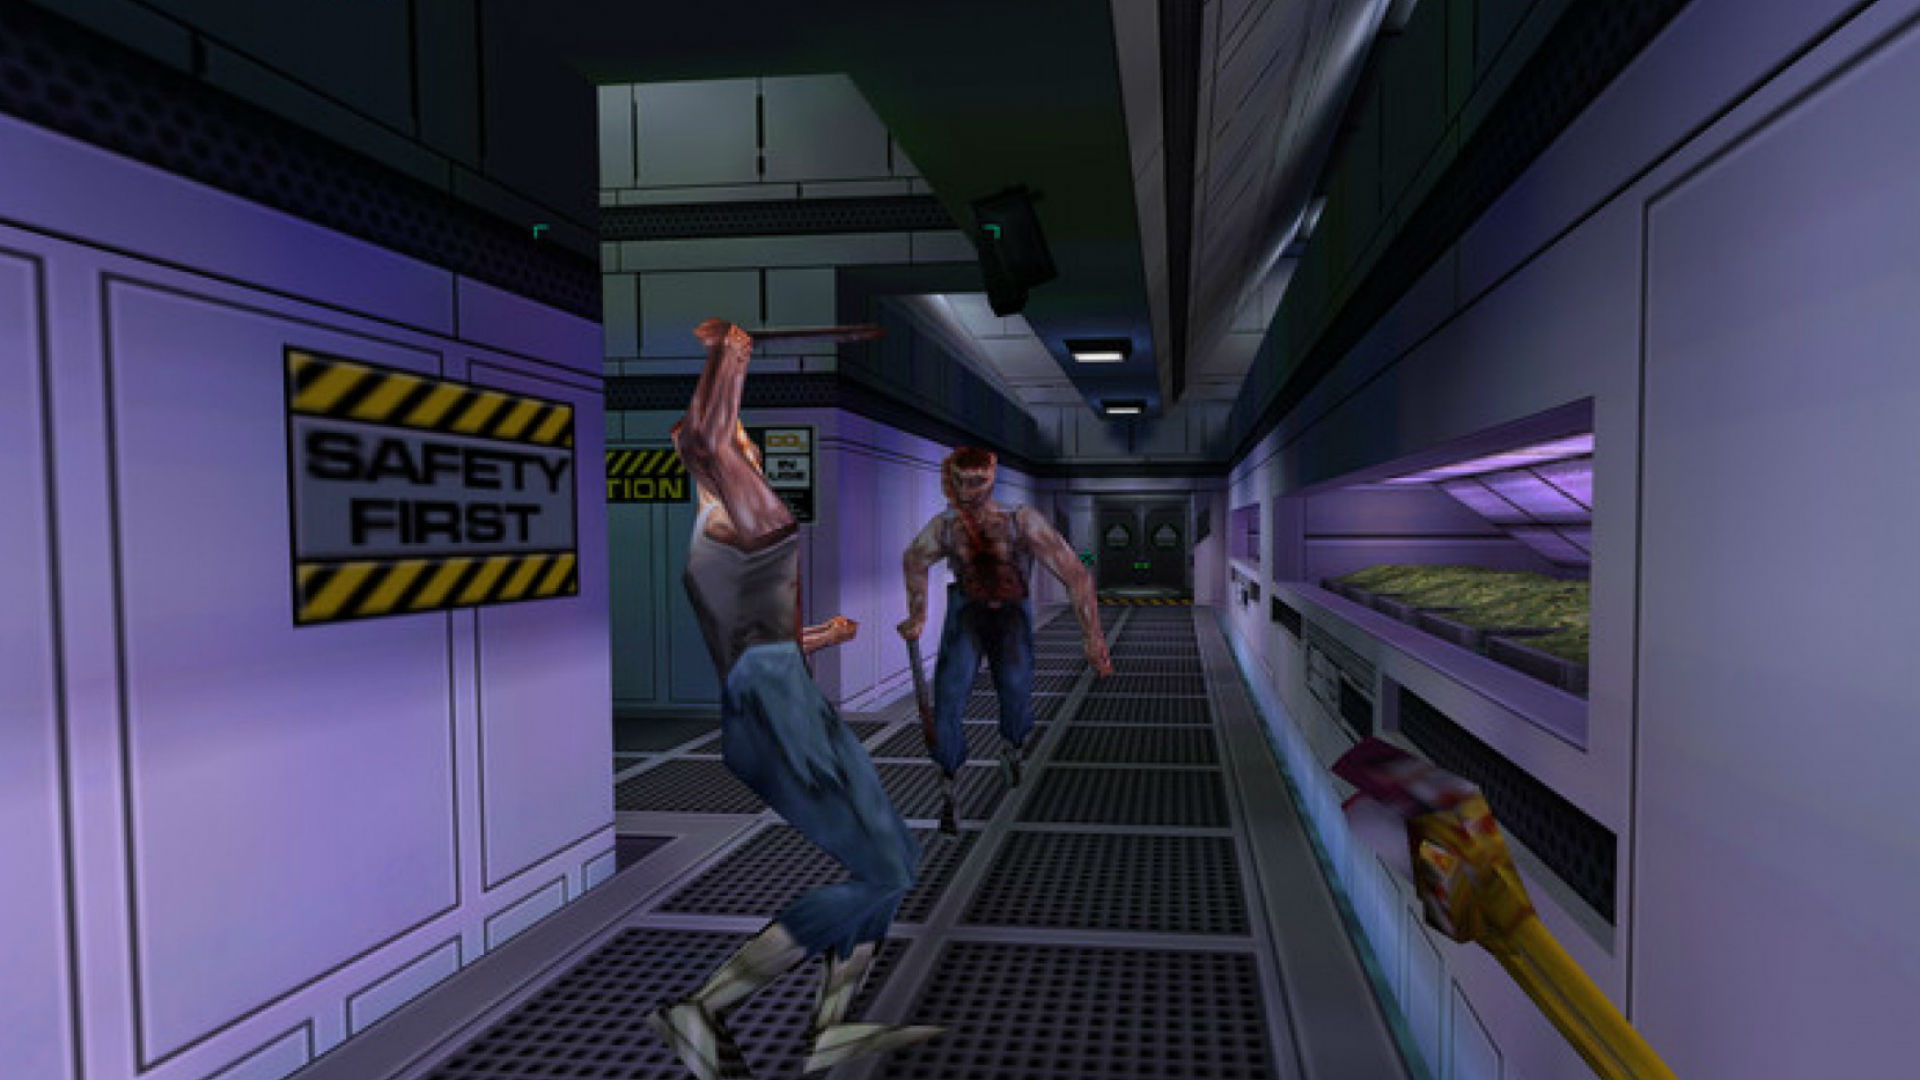 An altercation in a corridor in System Shock 2, one of the best old games. The sign on the wall reads 'Safety First'.